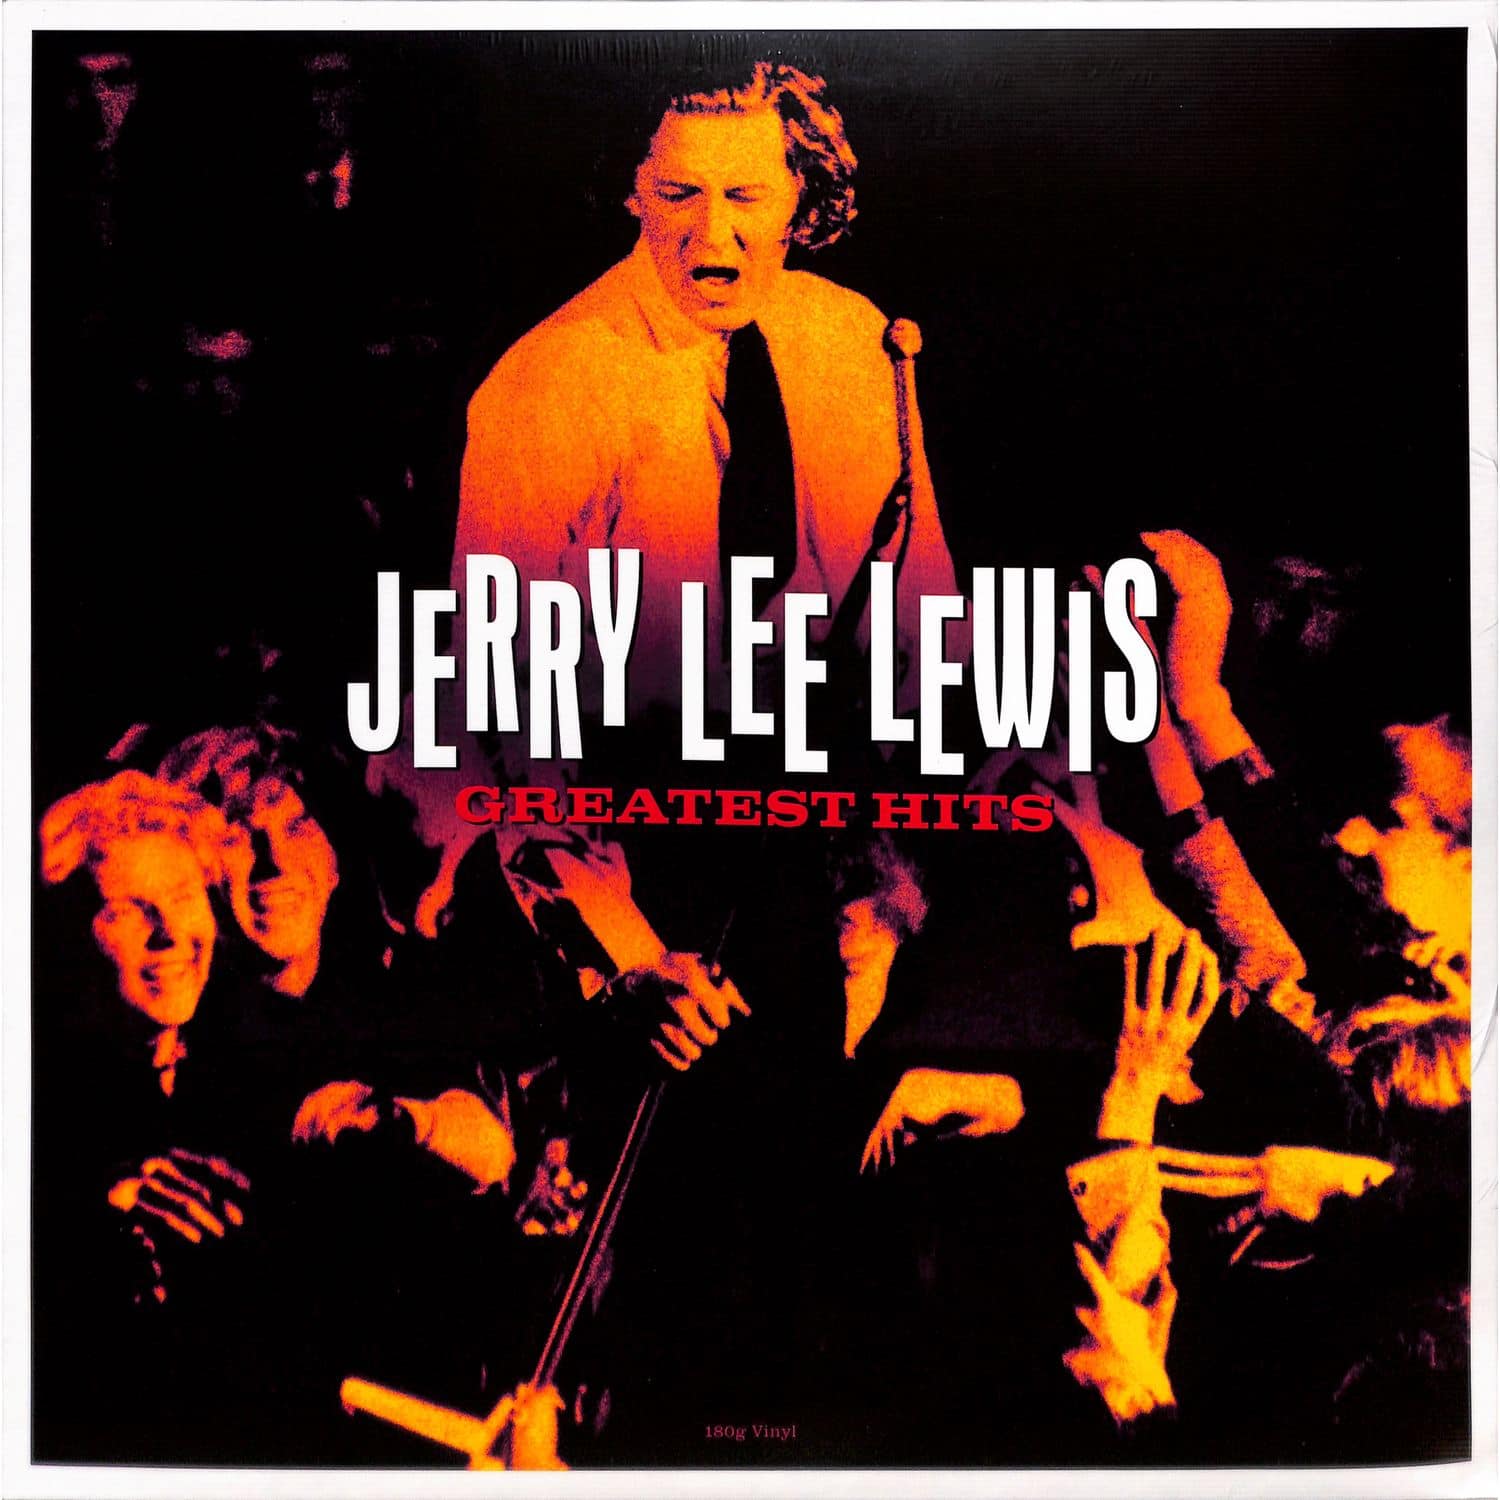 Jerry Lee Lewis - GREATEST HITS 